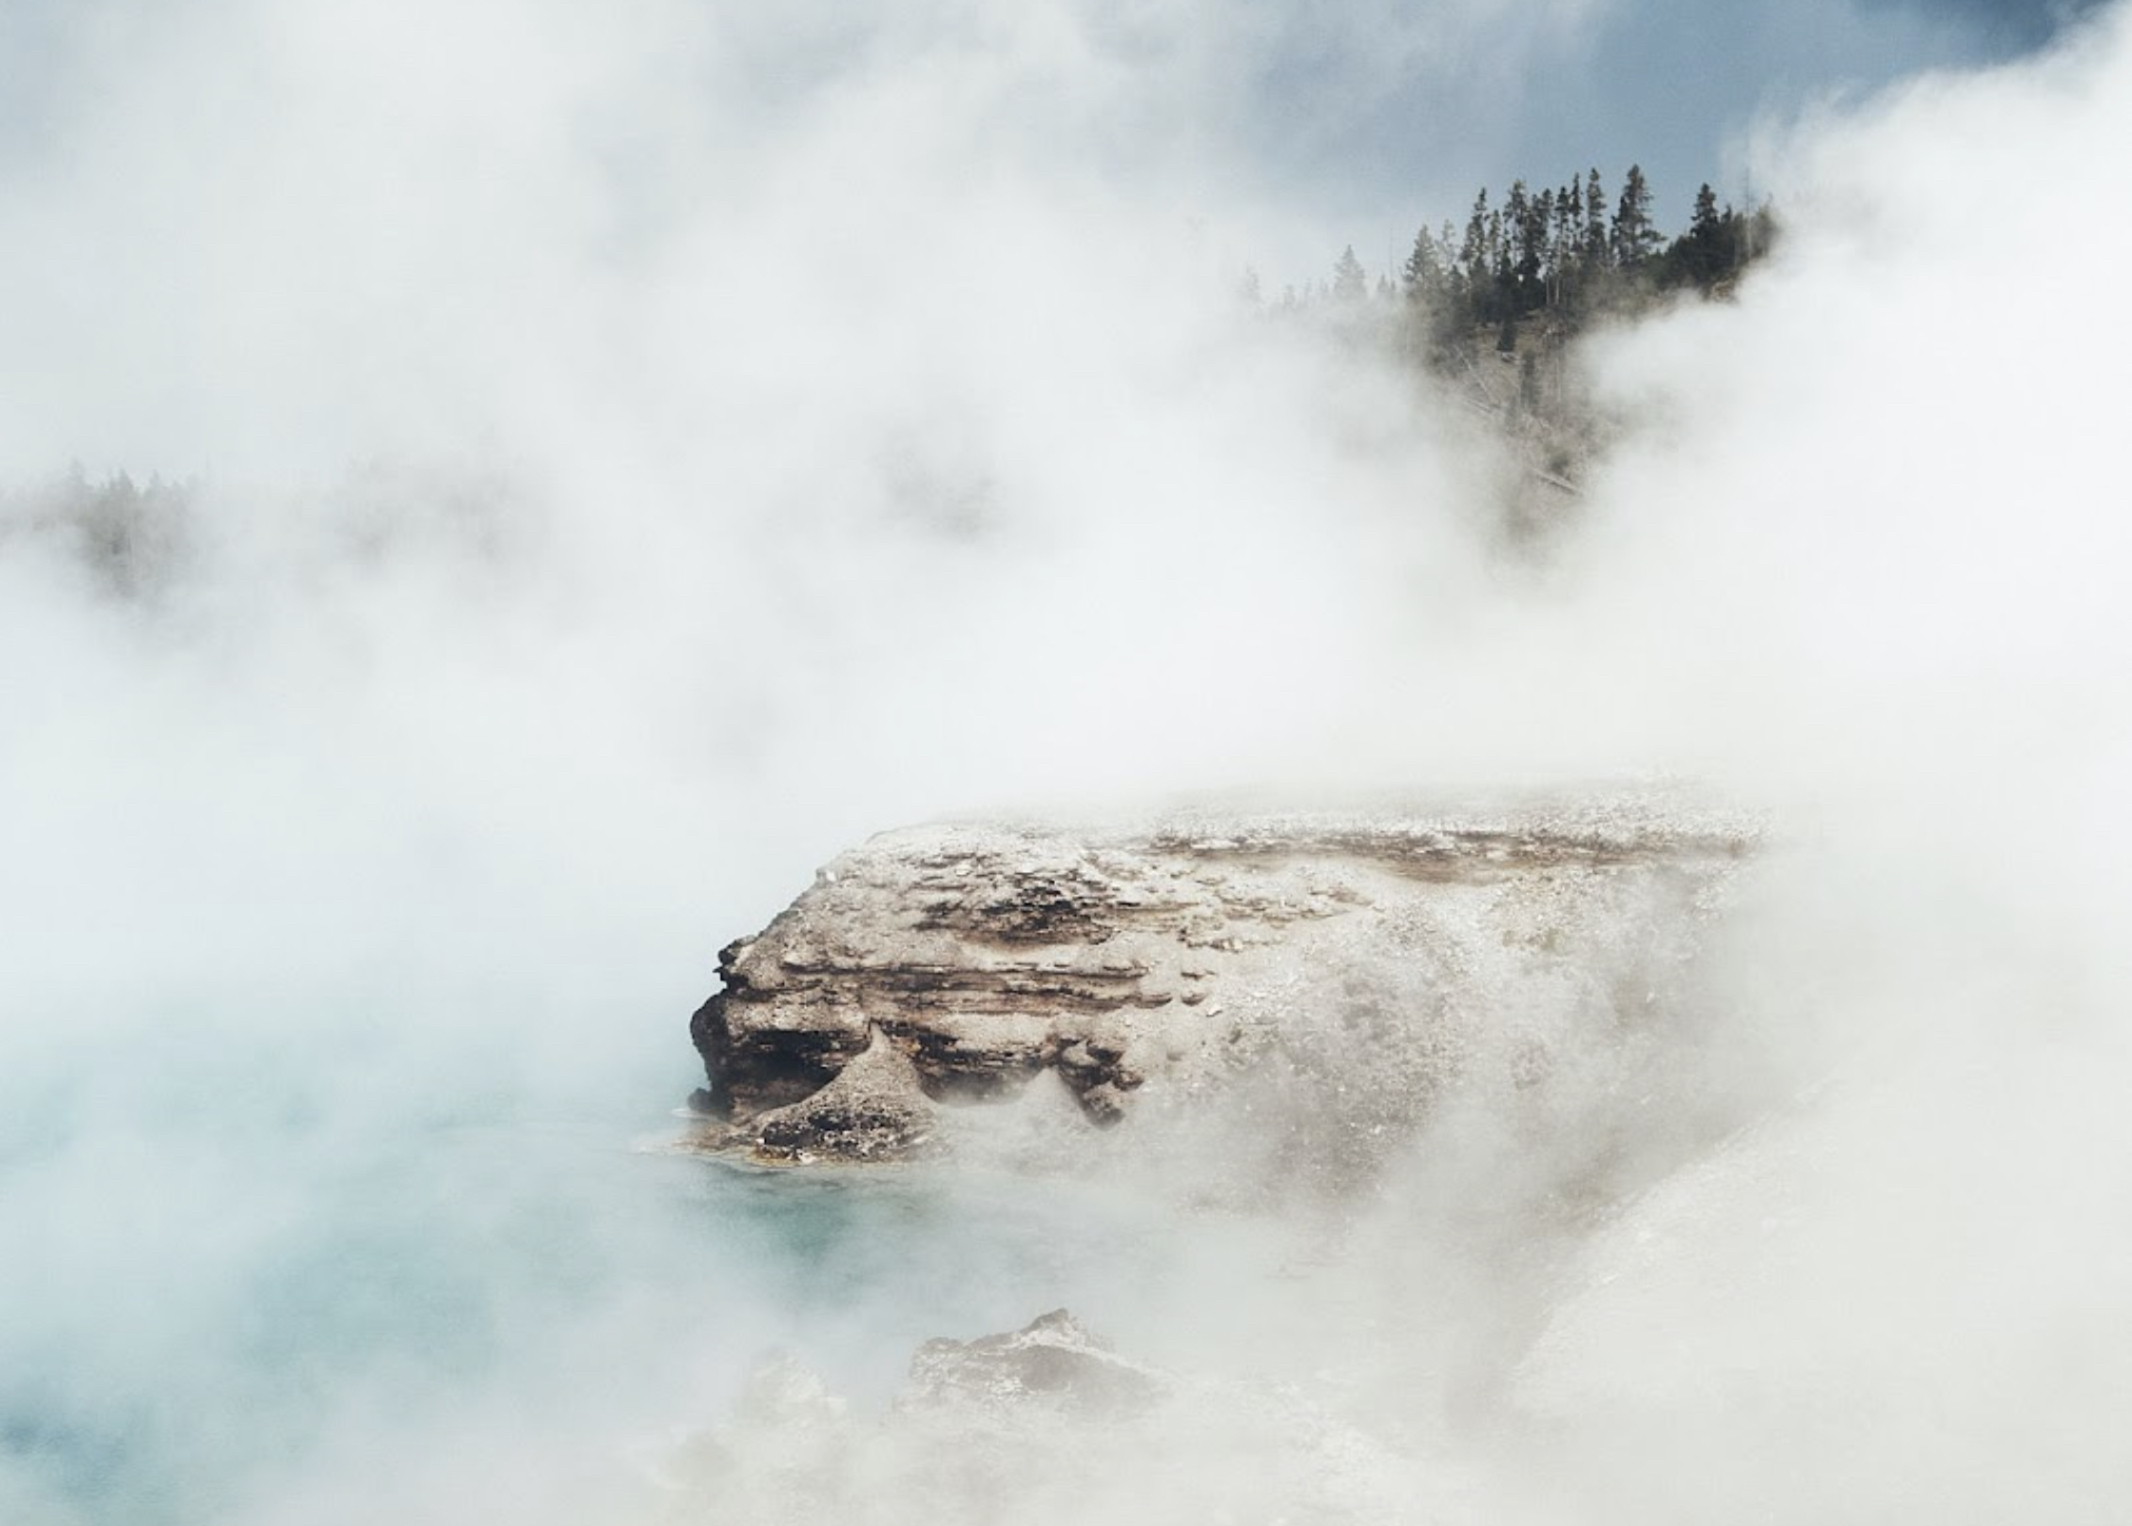 Mist rises over thermal springs in Yellowstone National Park